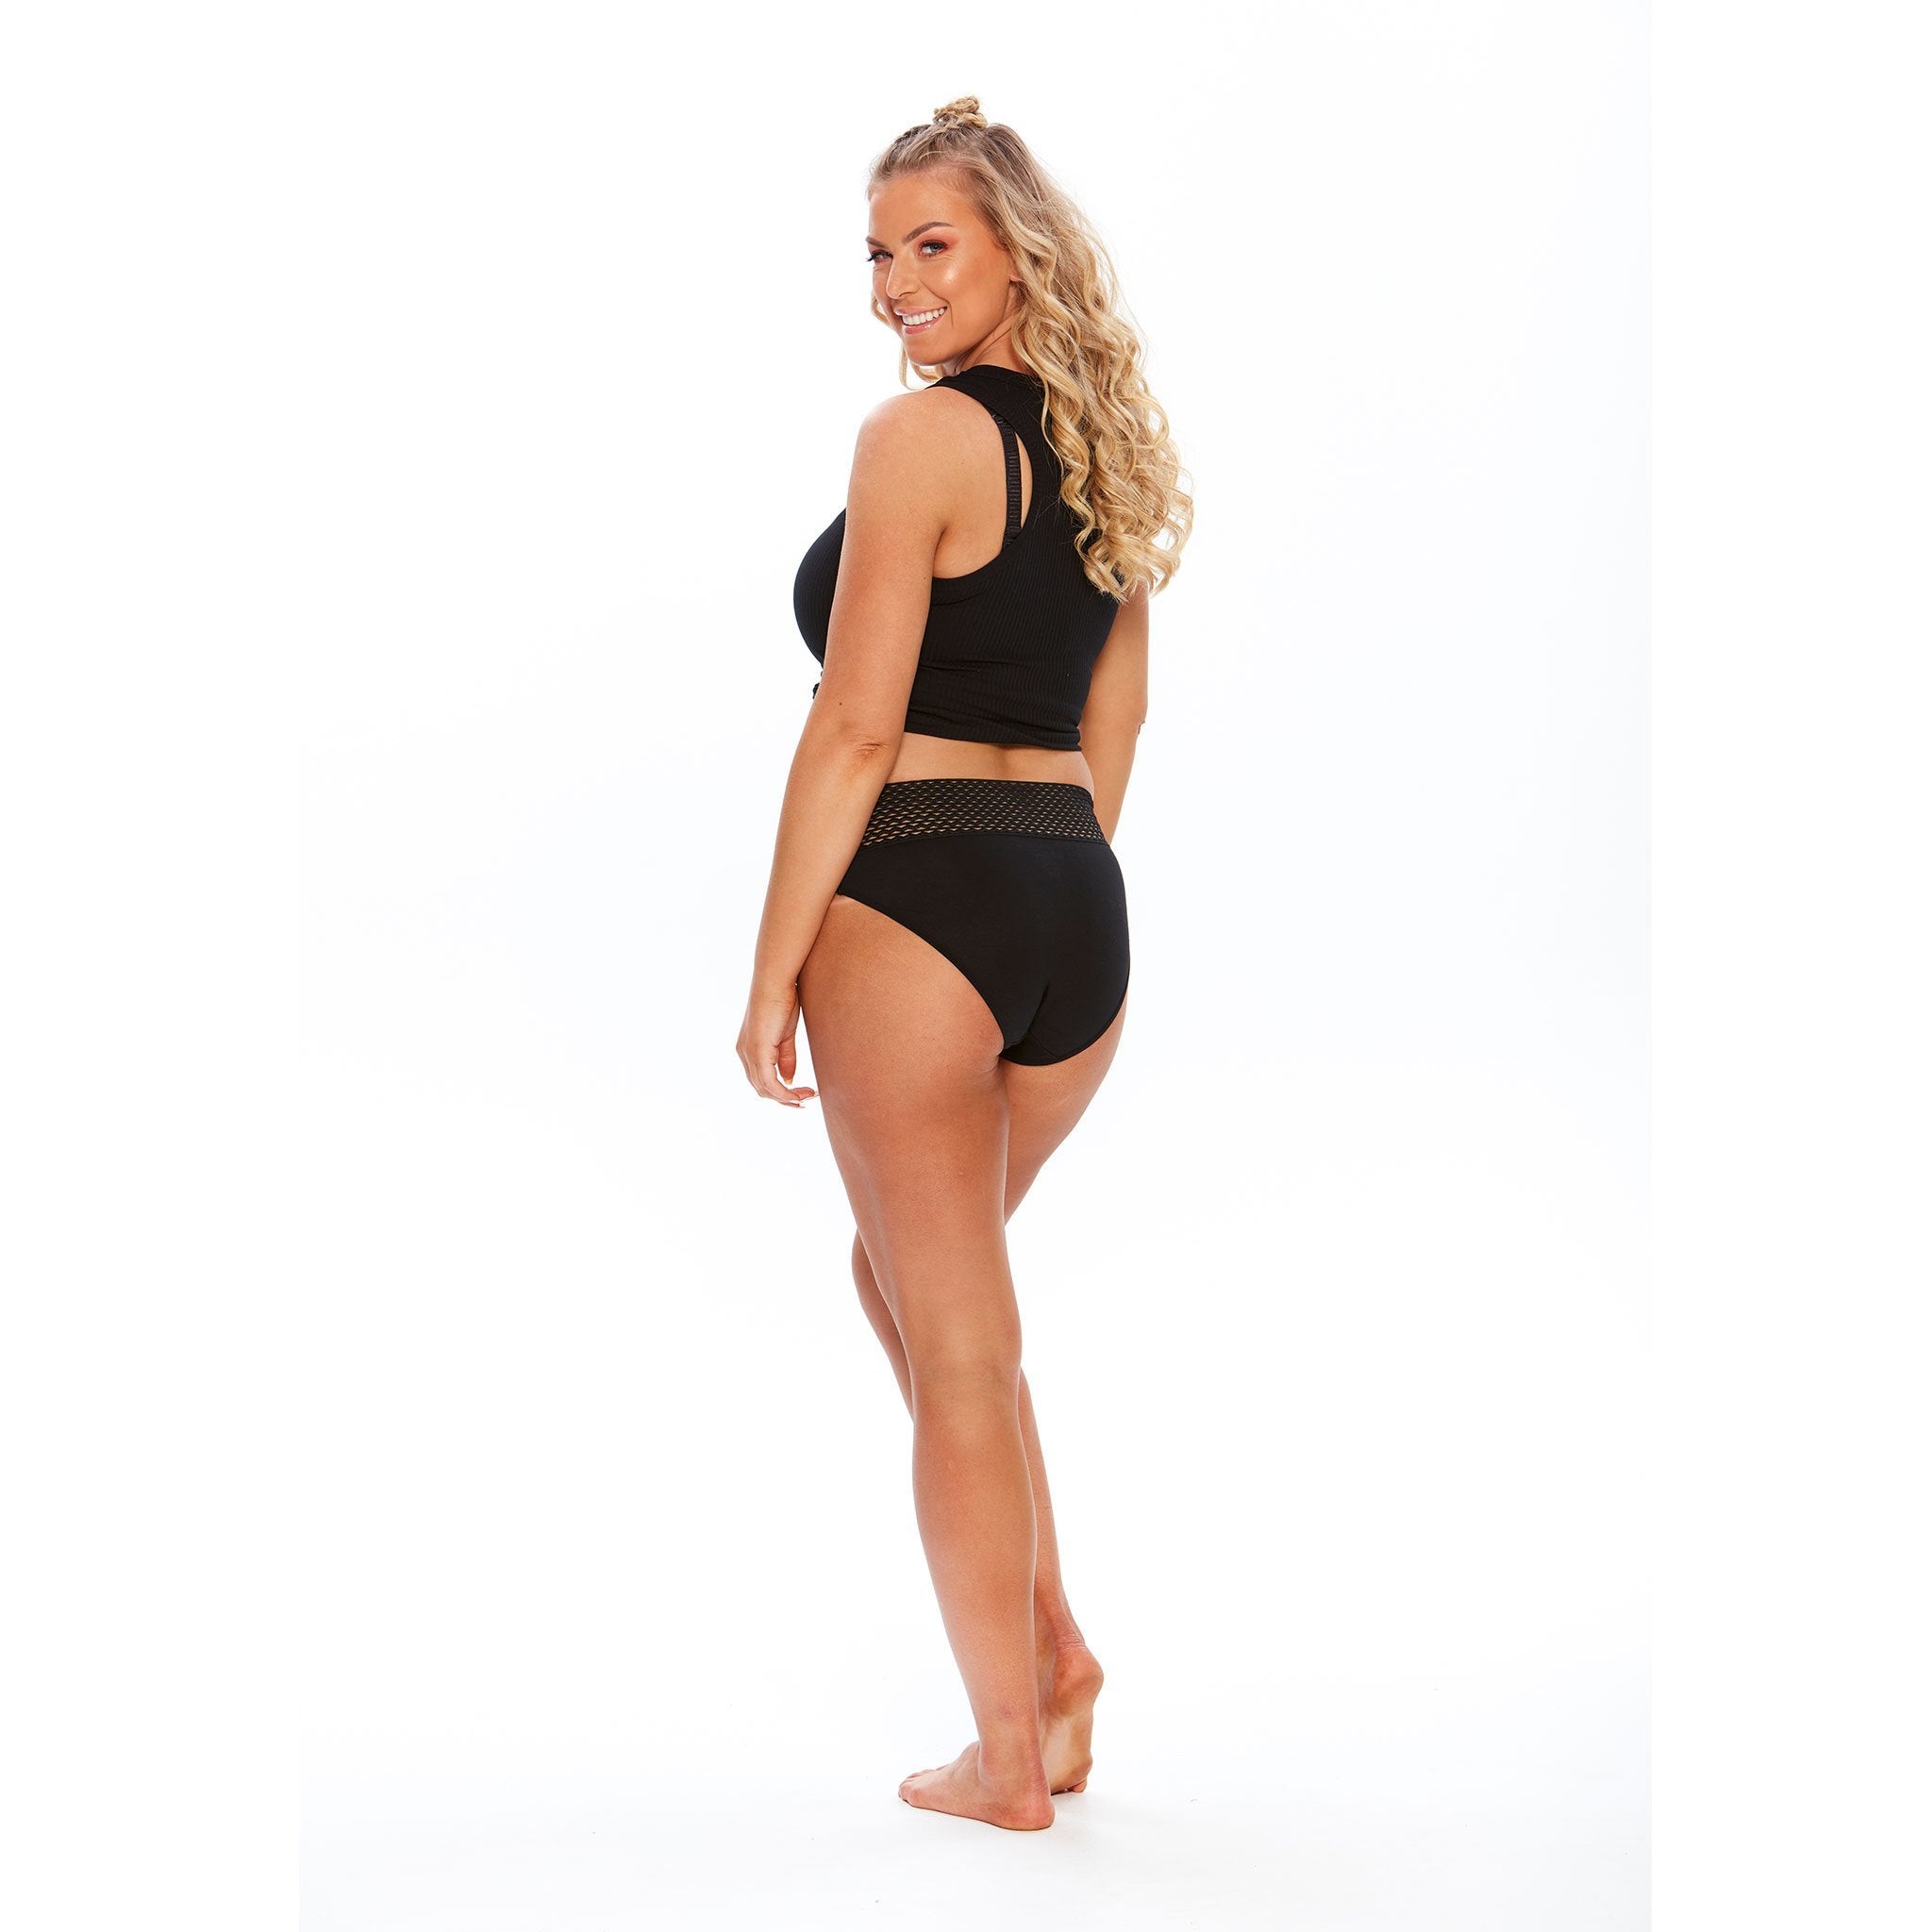 Everyday Lingerie Everyday Basics Brief - Briefs  Available at Illusions Lingerie